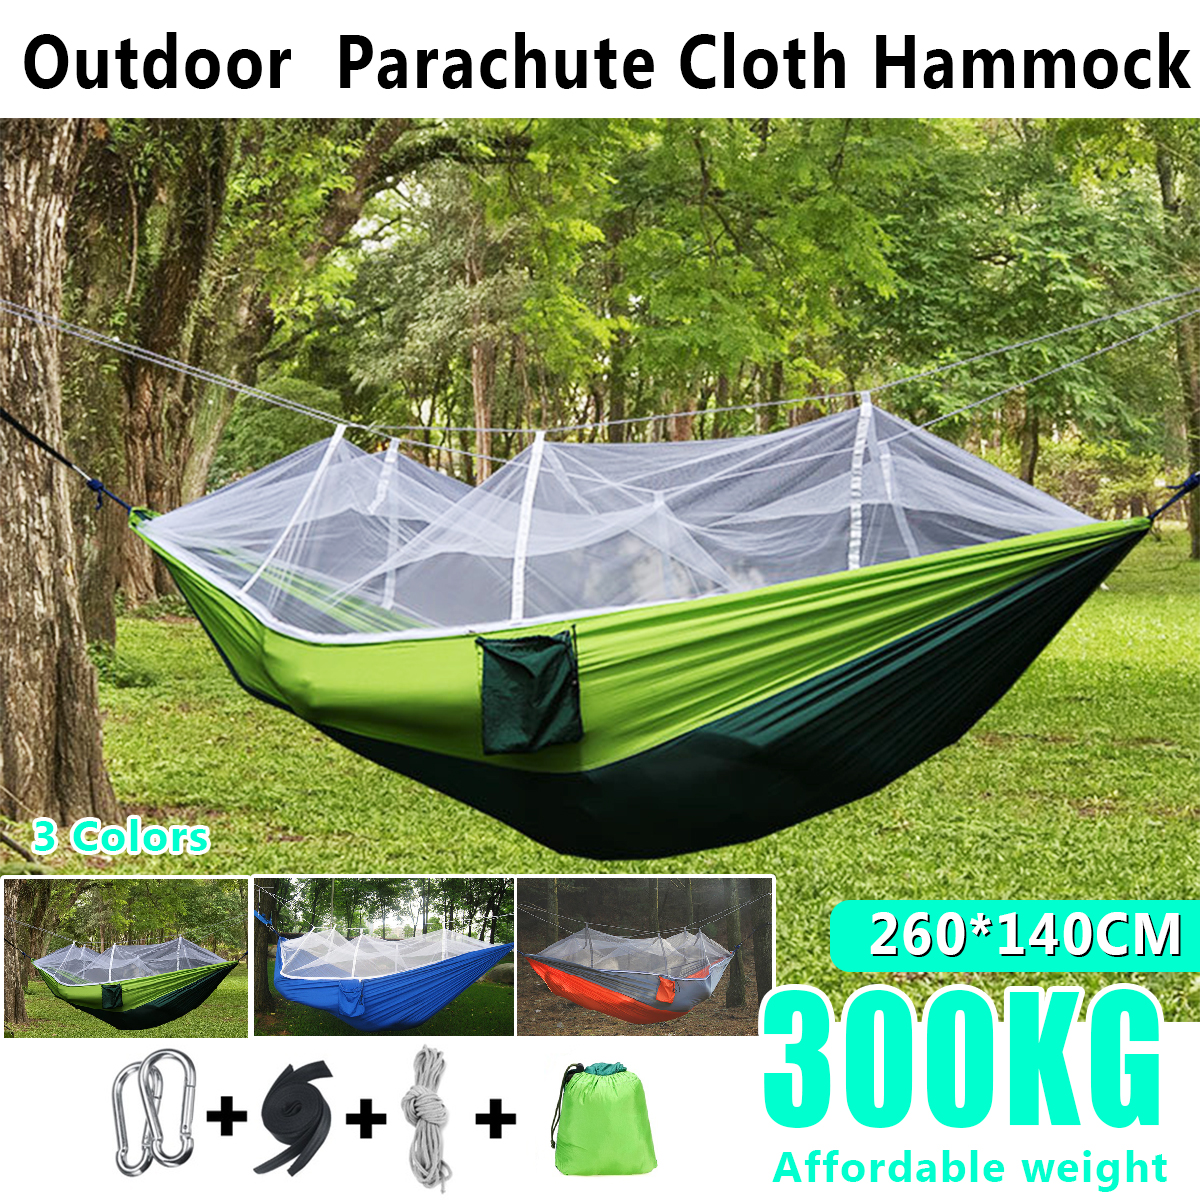 300kg-Portable-Double-Camping-Hammock-Parachute-Fabric-With-Mosquito-Net-1609645-1